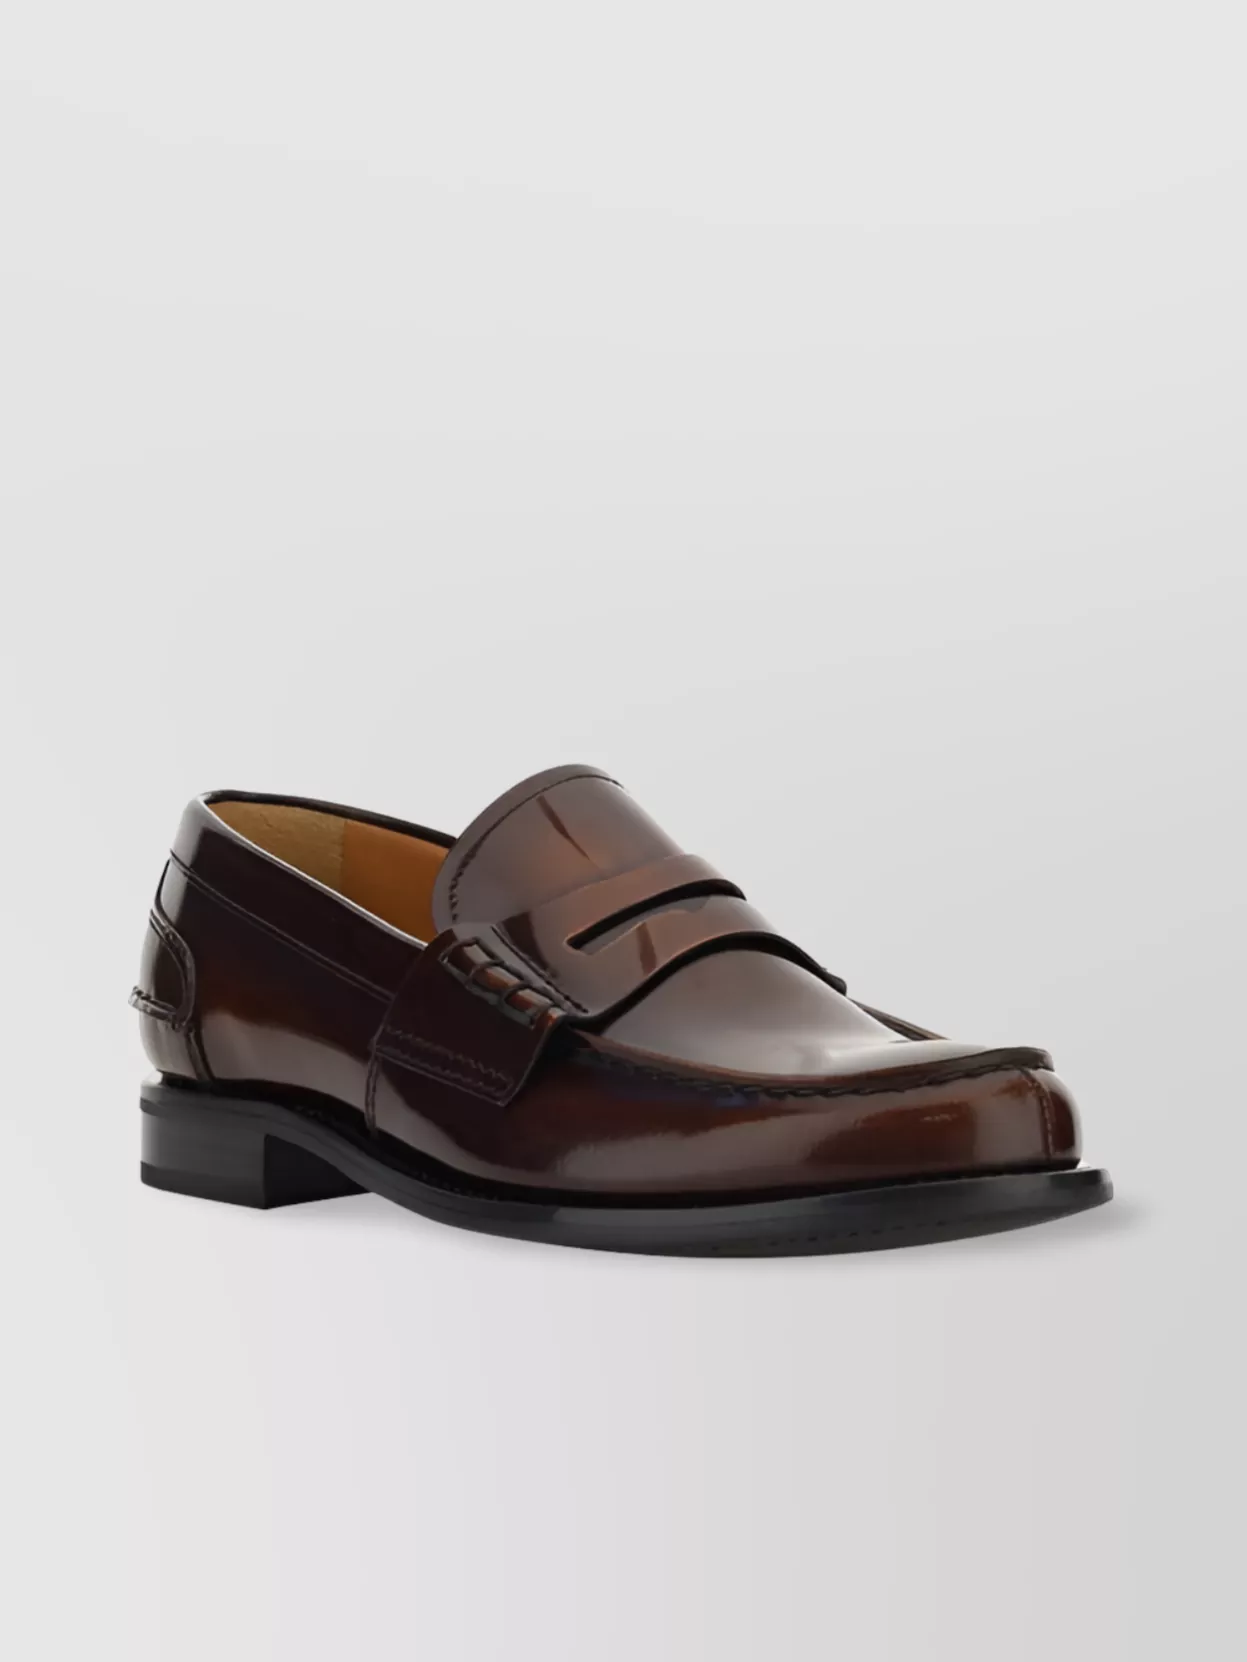 Church's Calfskin Penny Loafers Elongated Toe In Brown